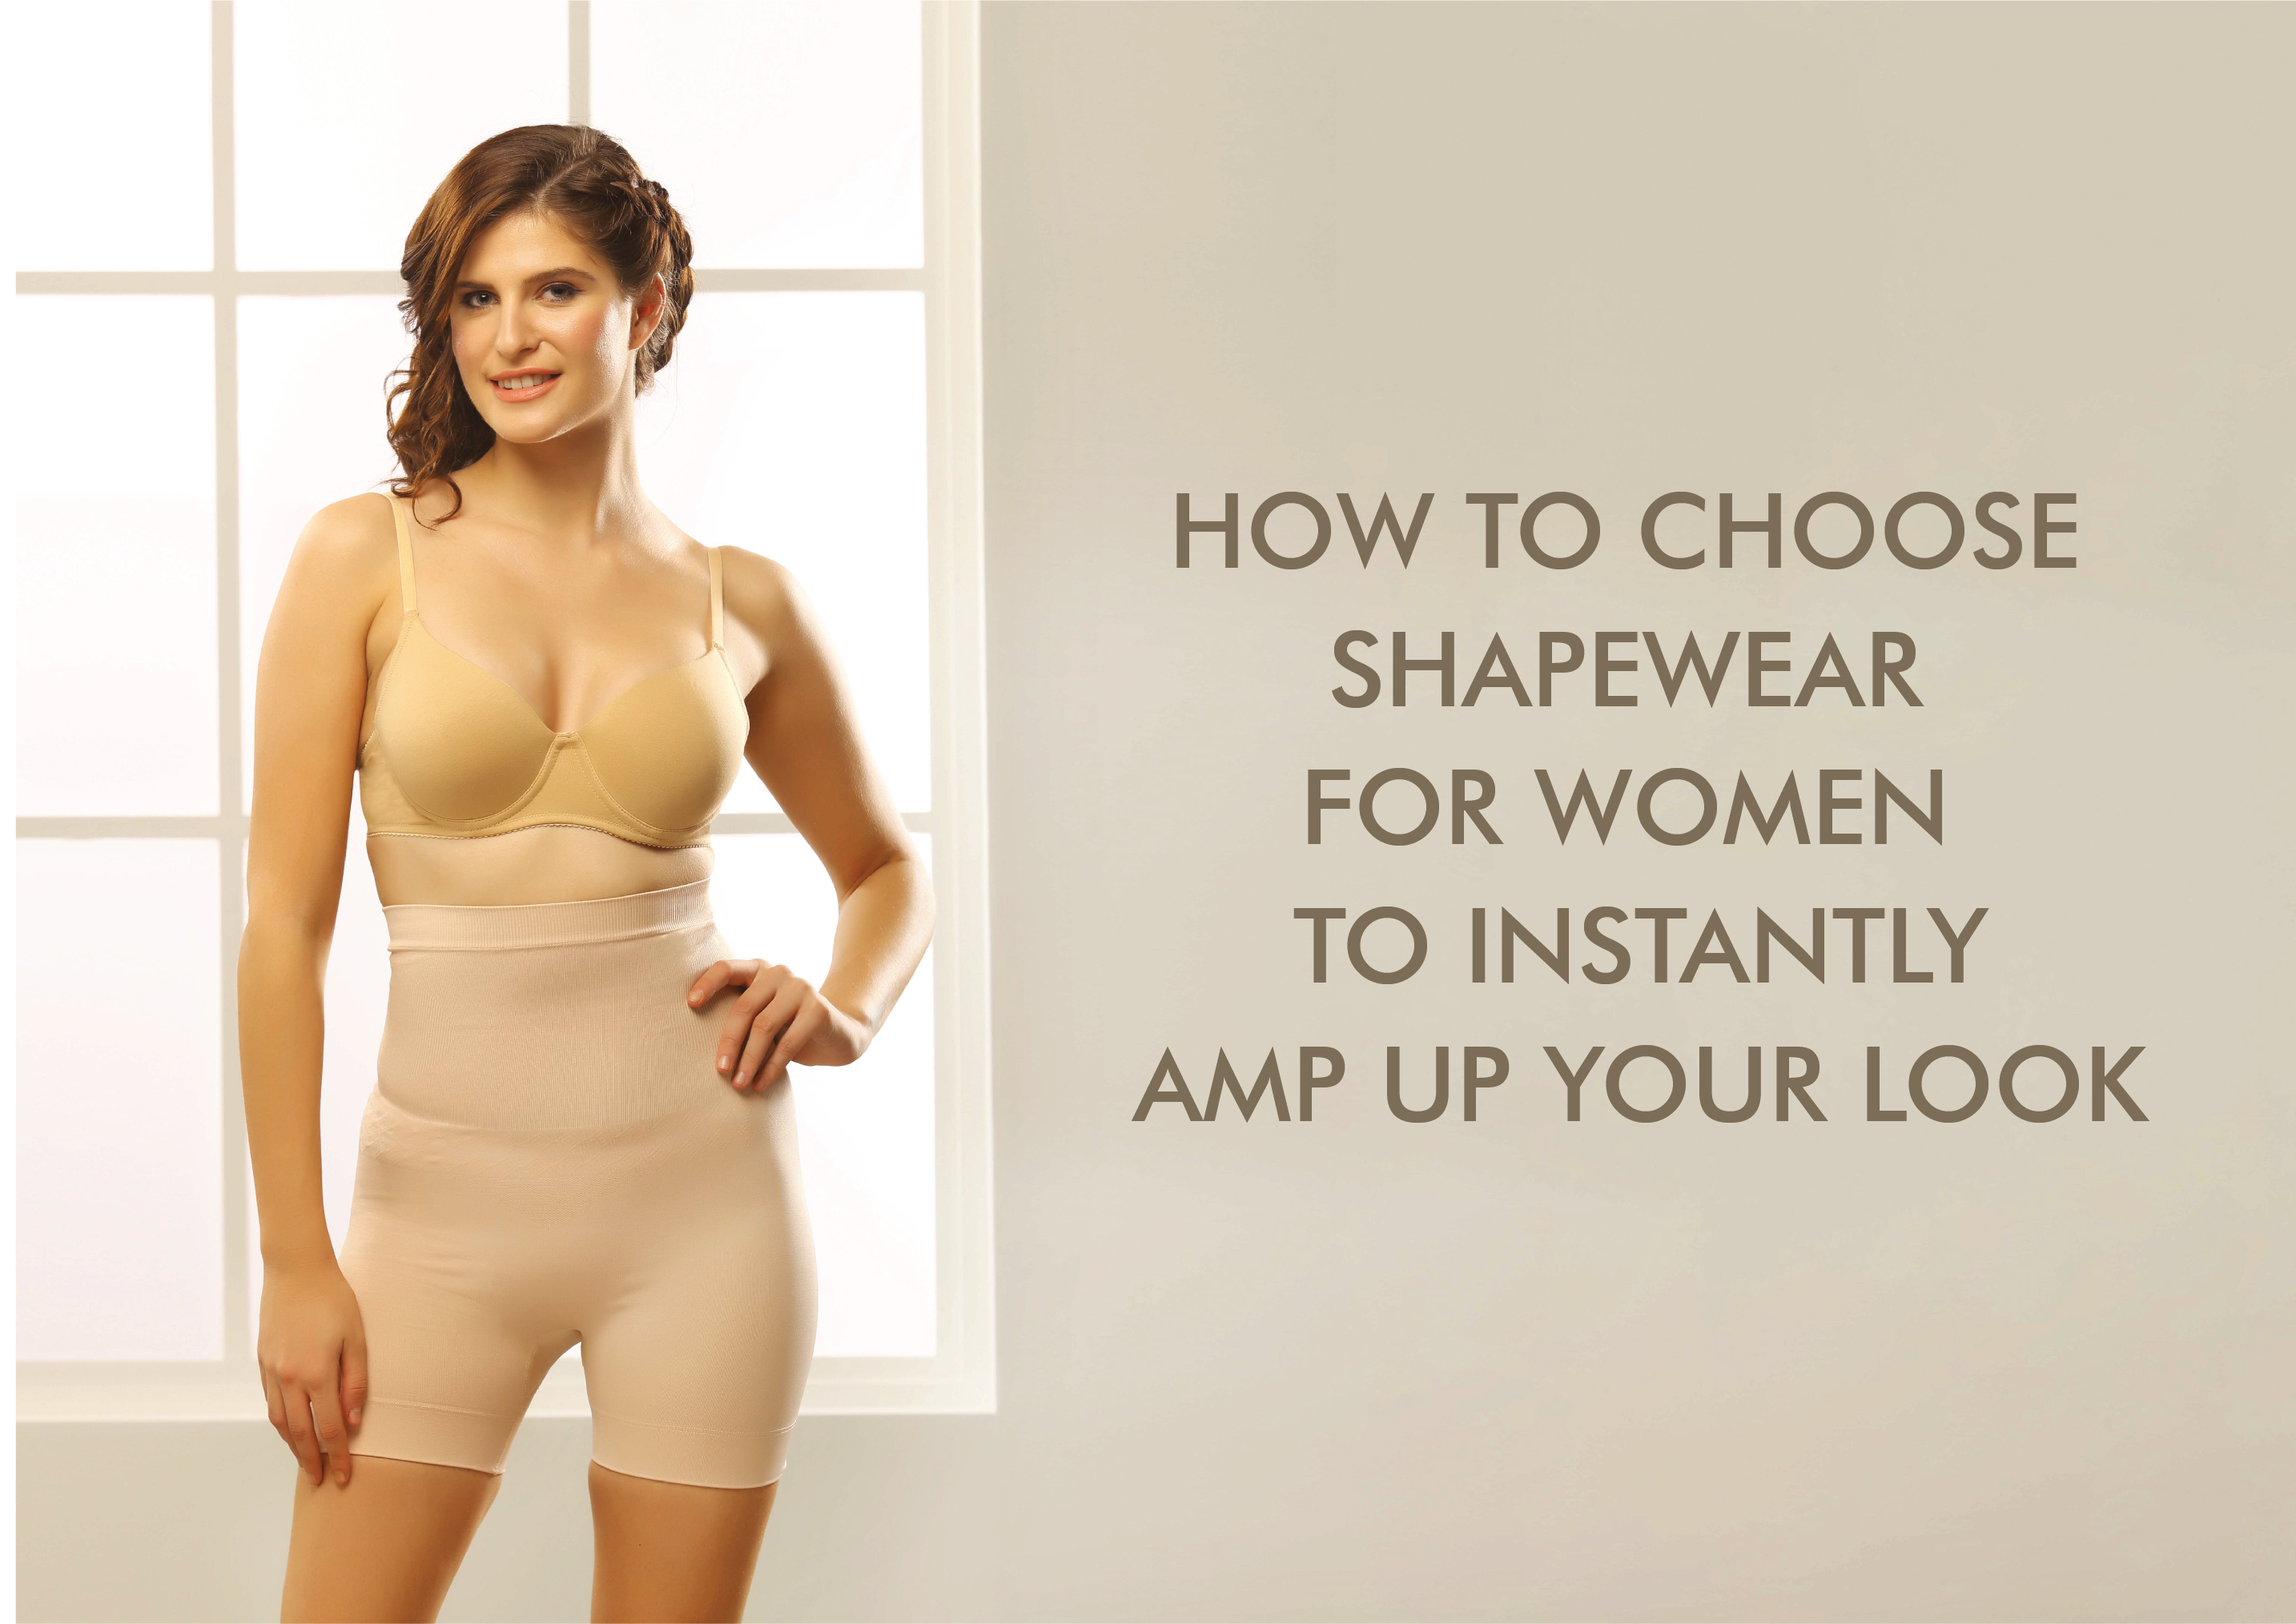 If you are looking at giving shapewear a try here are some tips